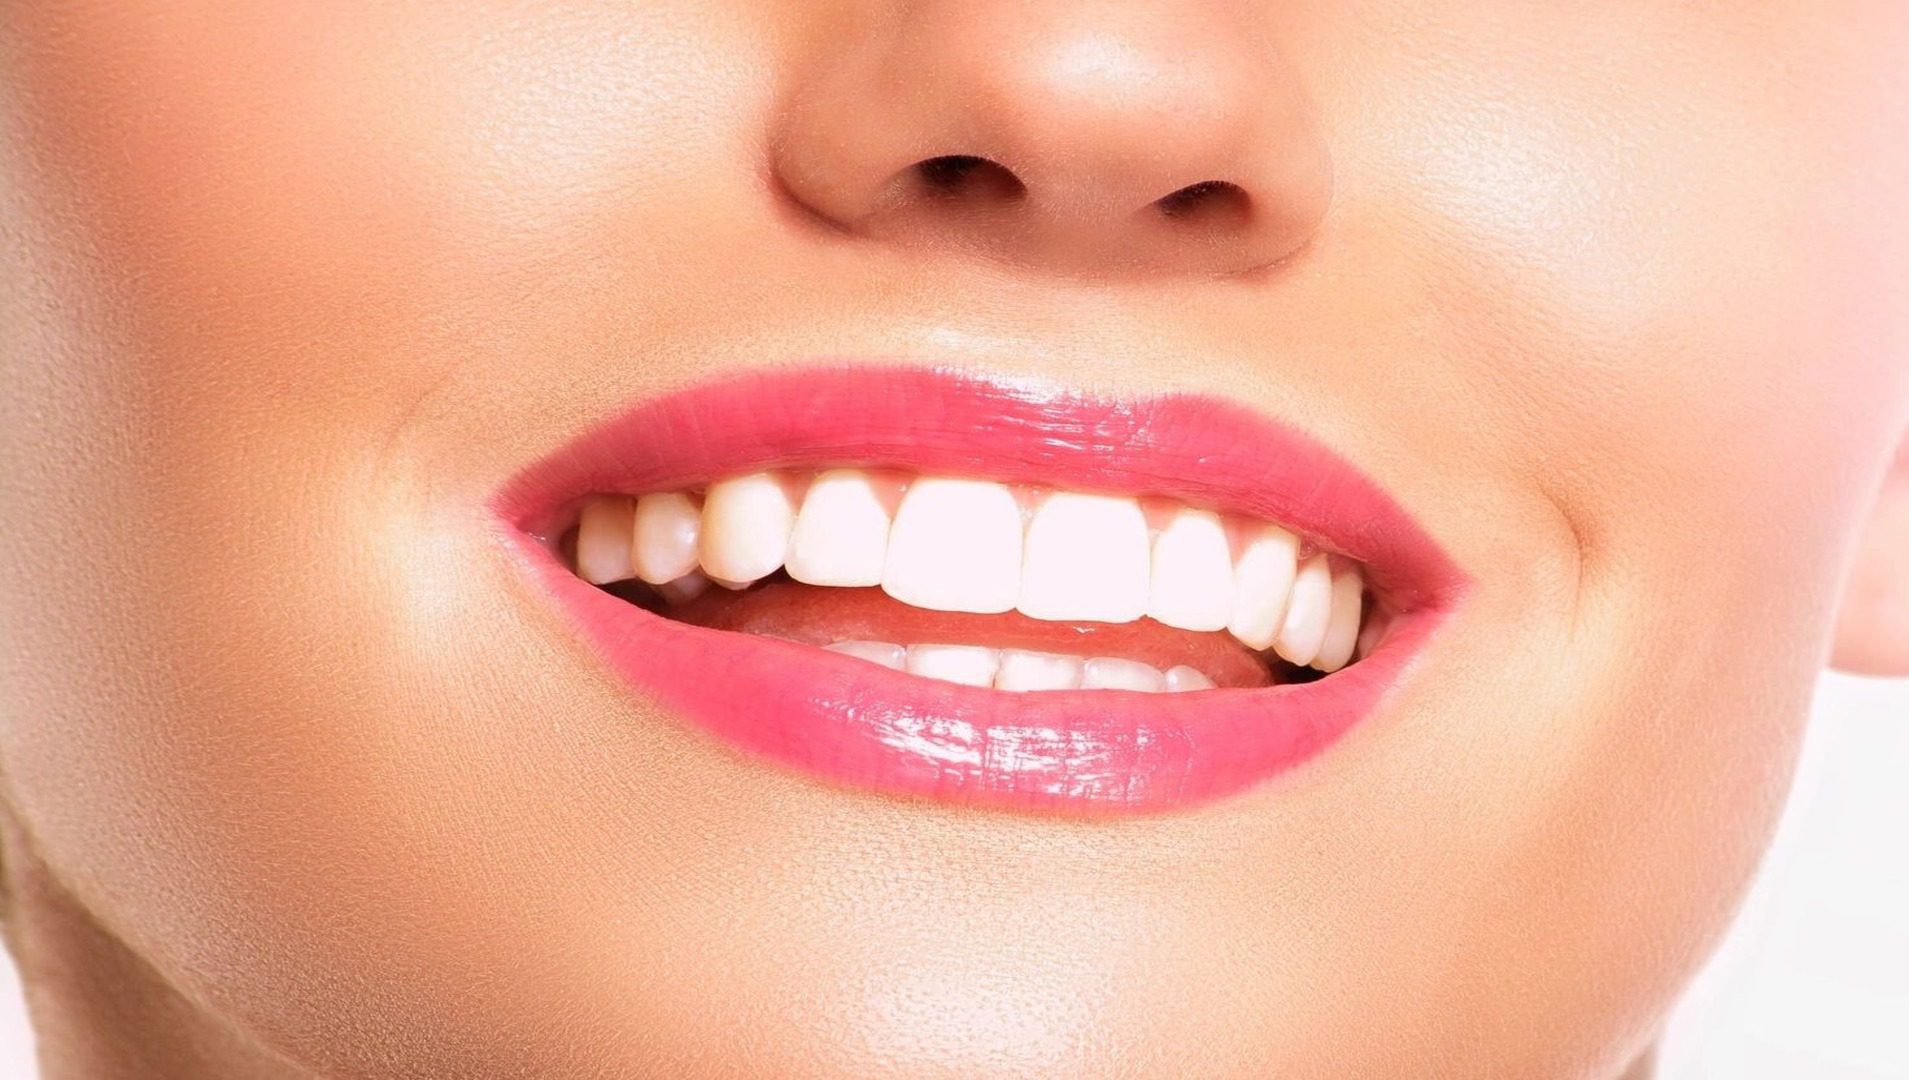 A close up of the teeth of a woman with pink lips